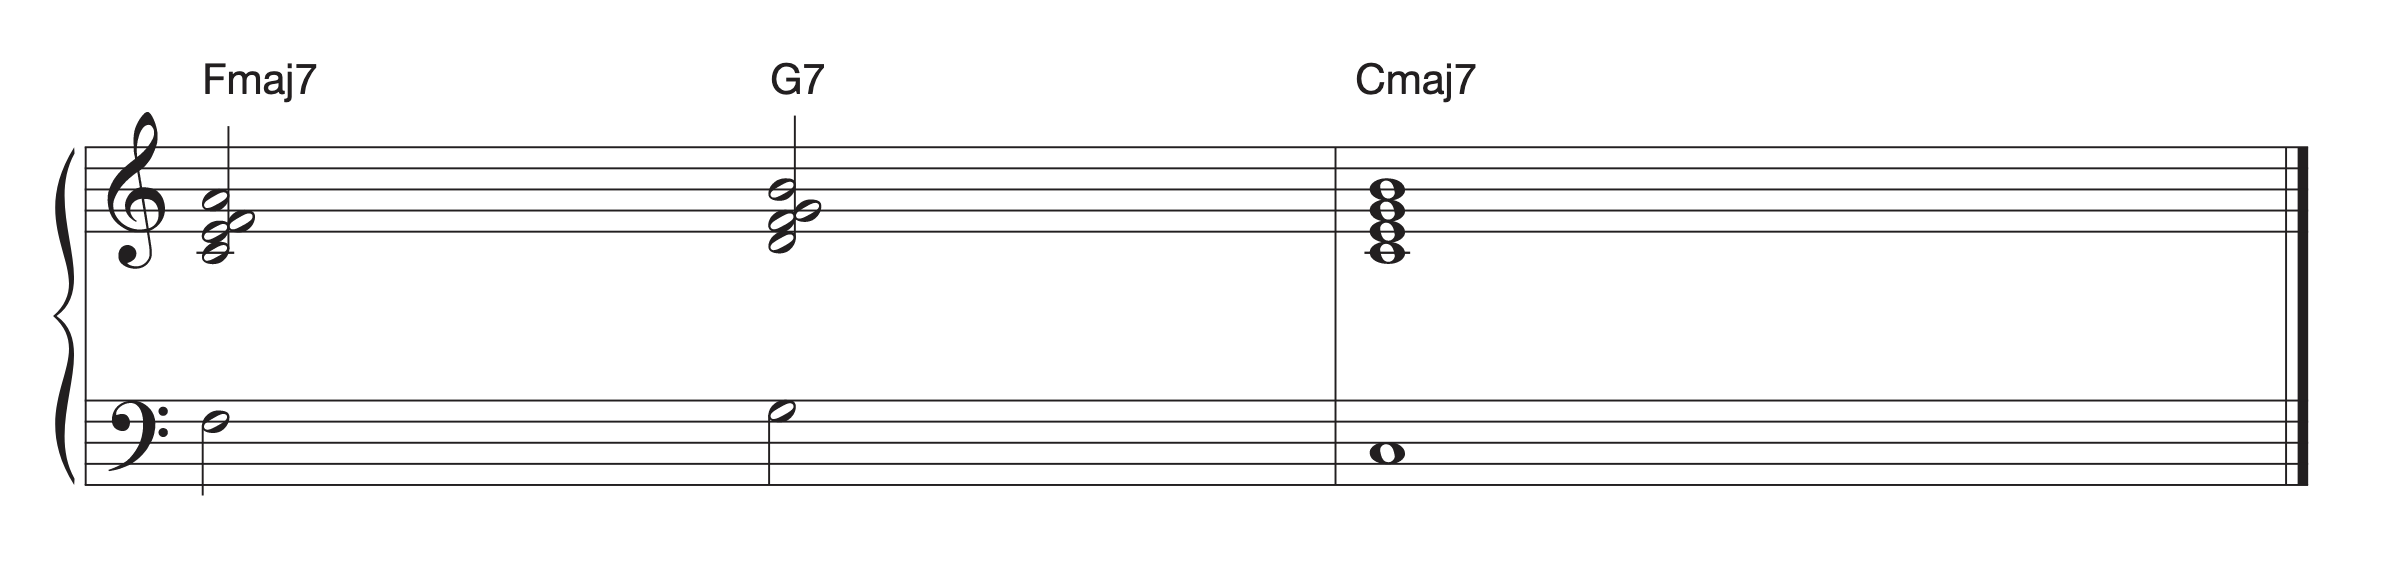 Music notation example shows what a four-way close looks like using chord tones only and the primary rules of contemporary voice leading.